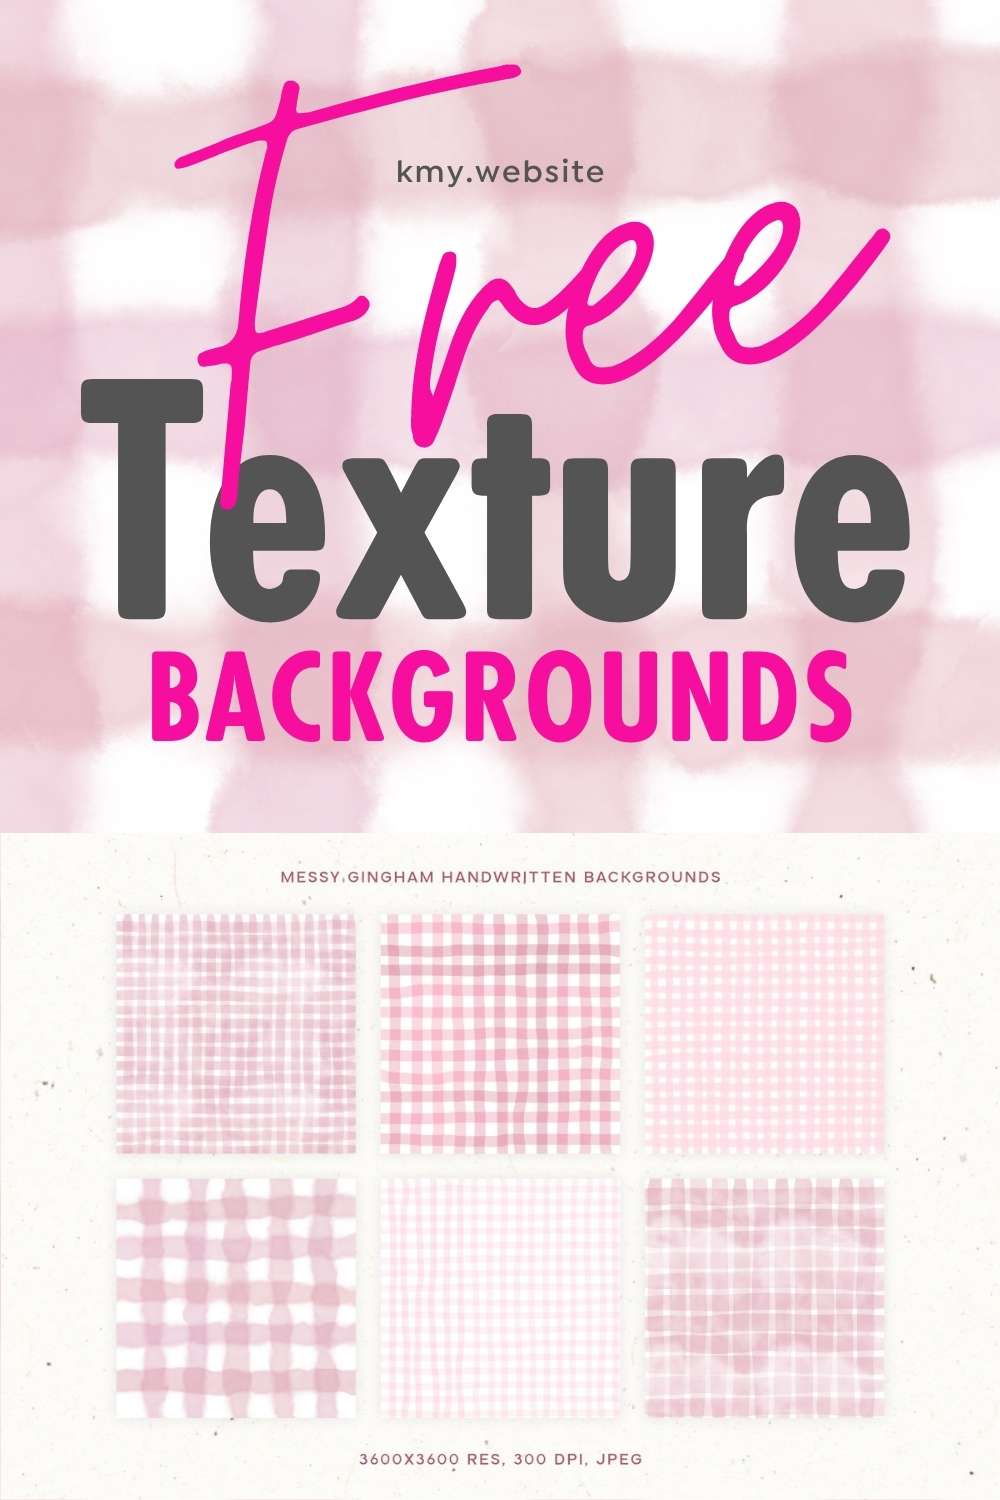 Download Commercial-free Texture Background Images Now